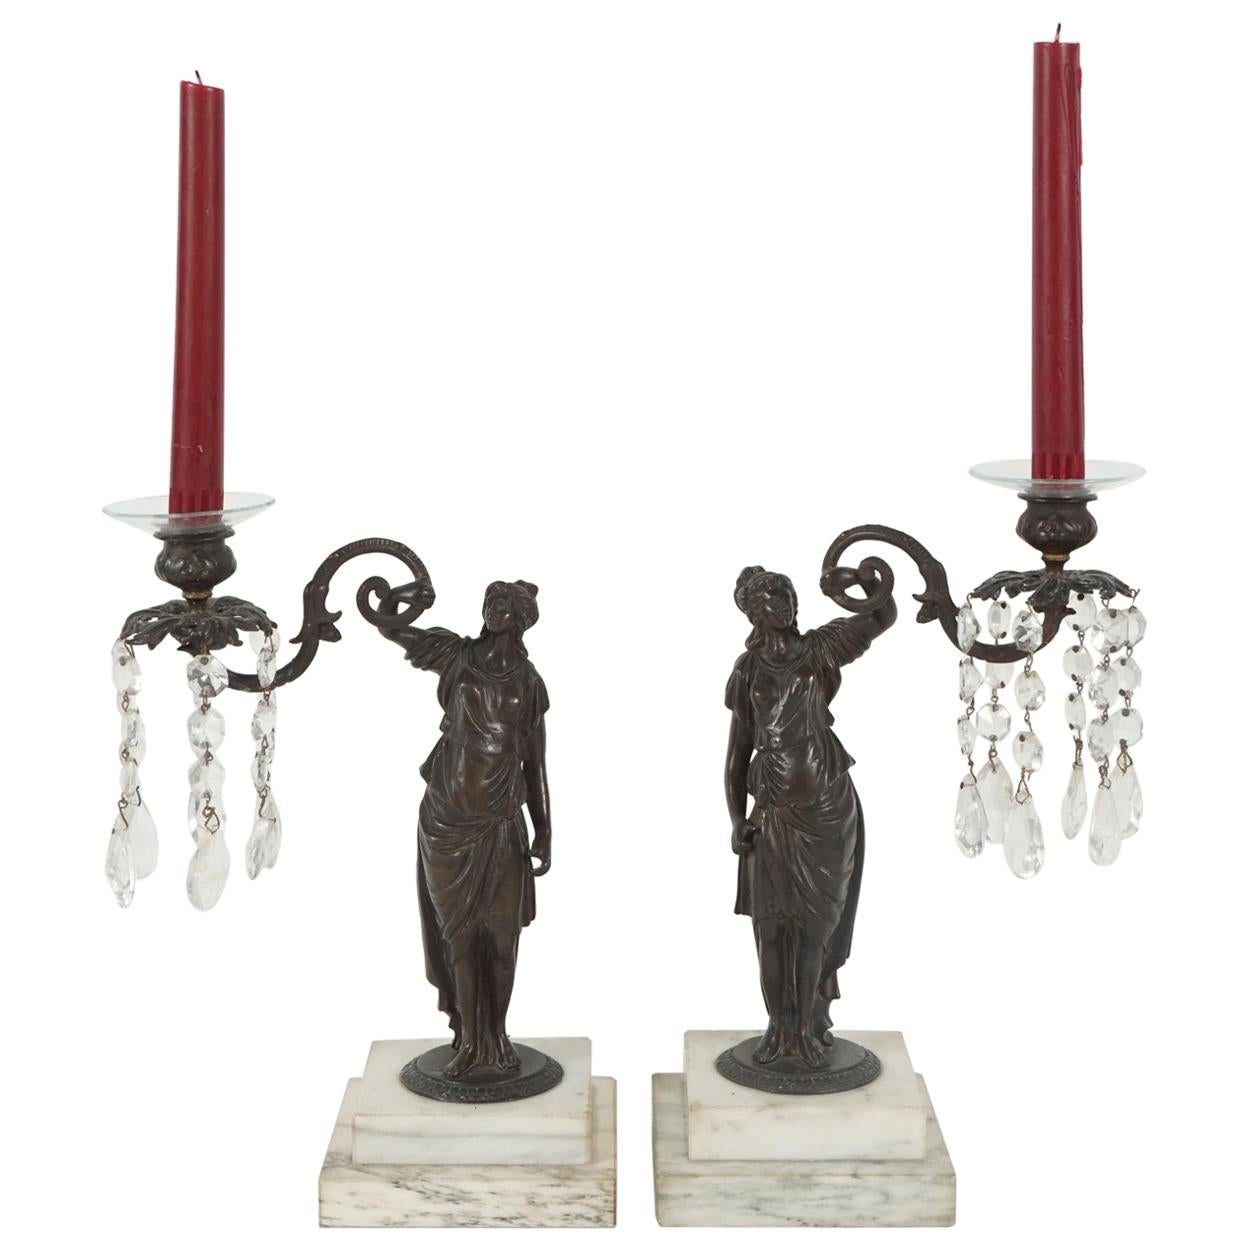 Pair of Period English Regency Cast Bronze and Rock Crystal Candlesticks